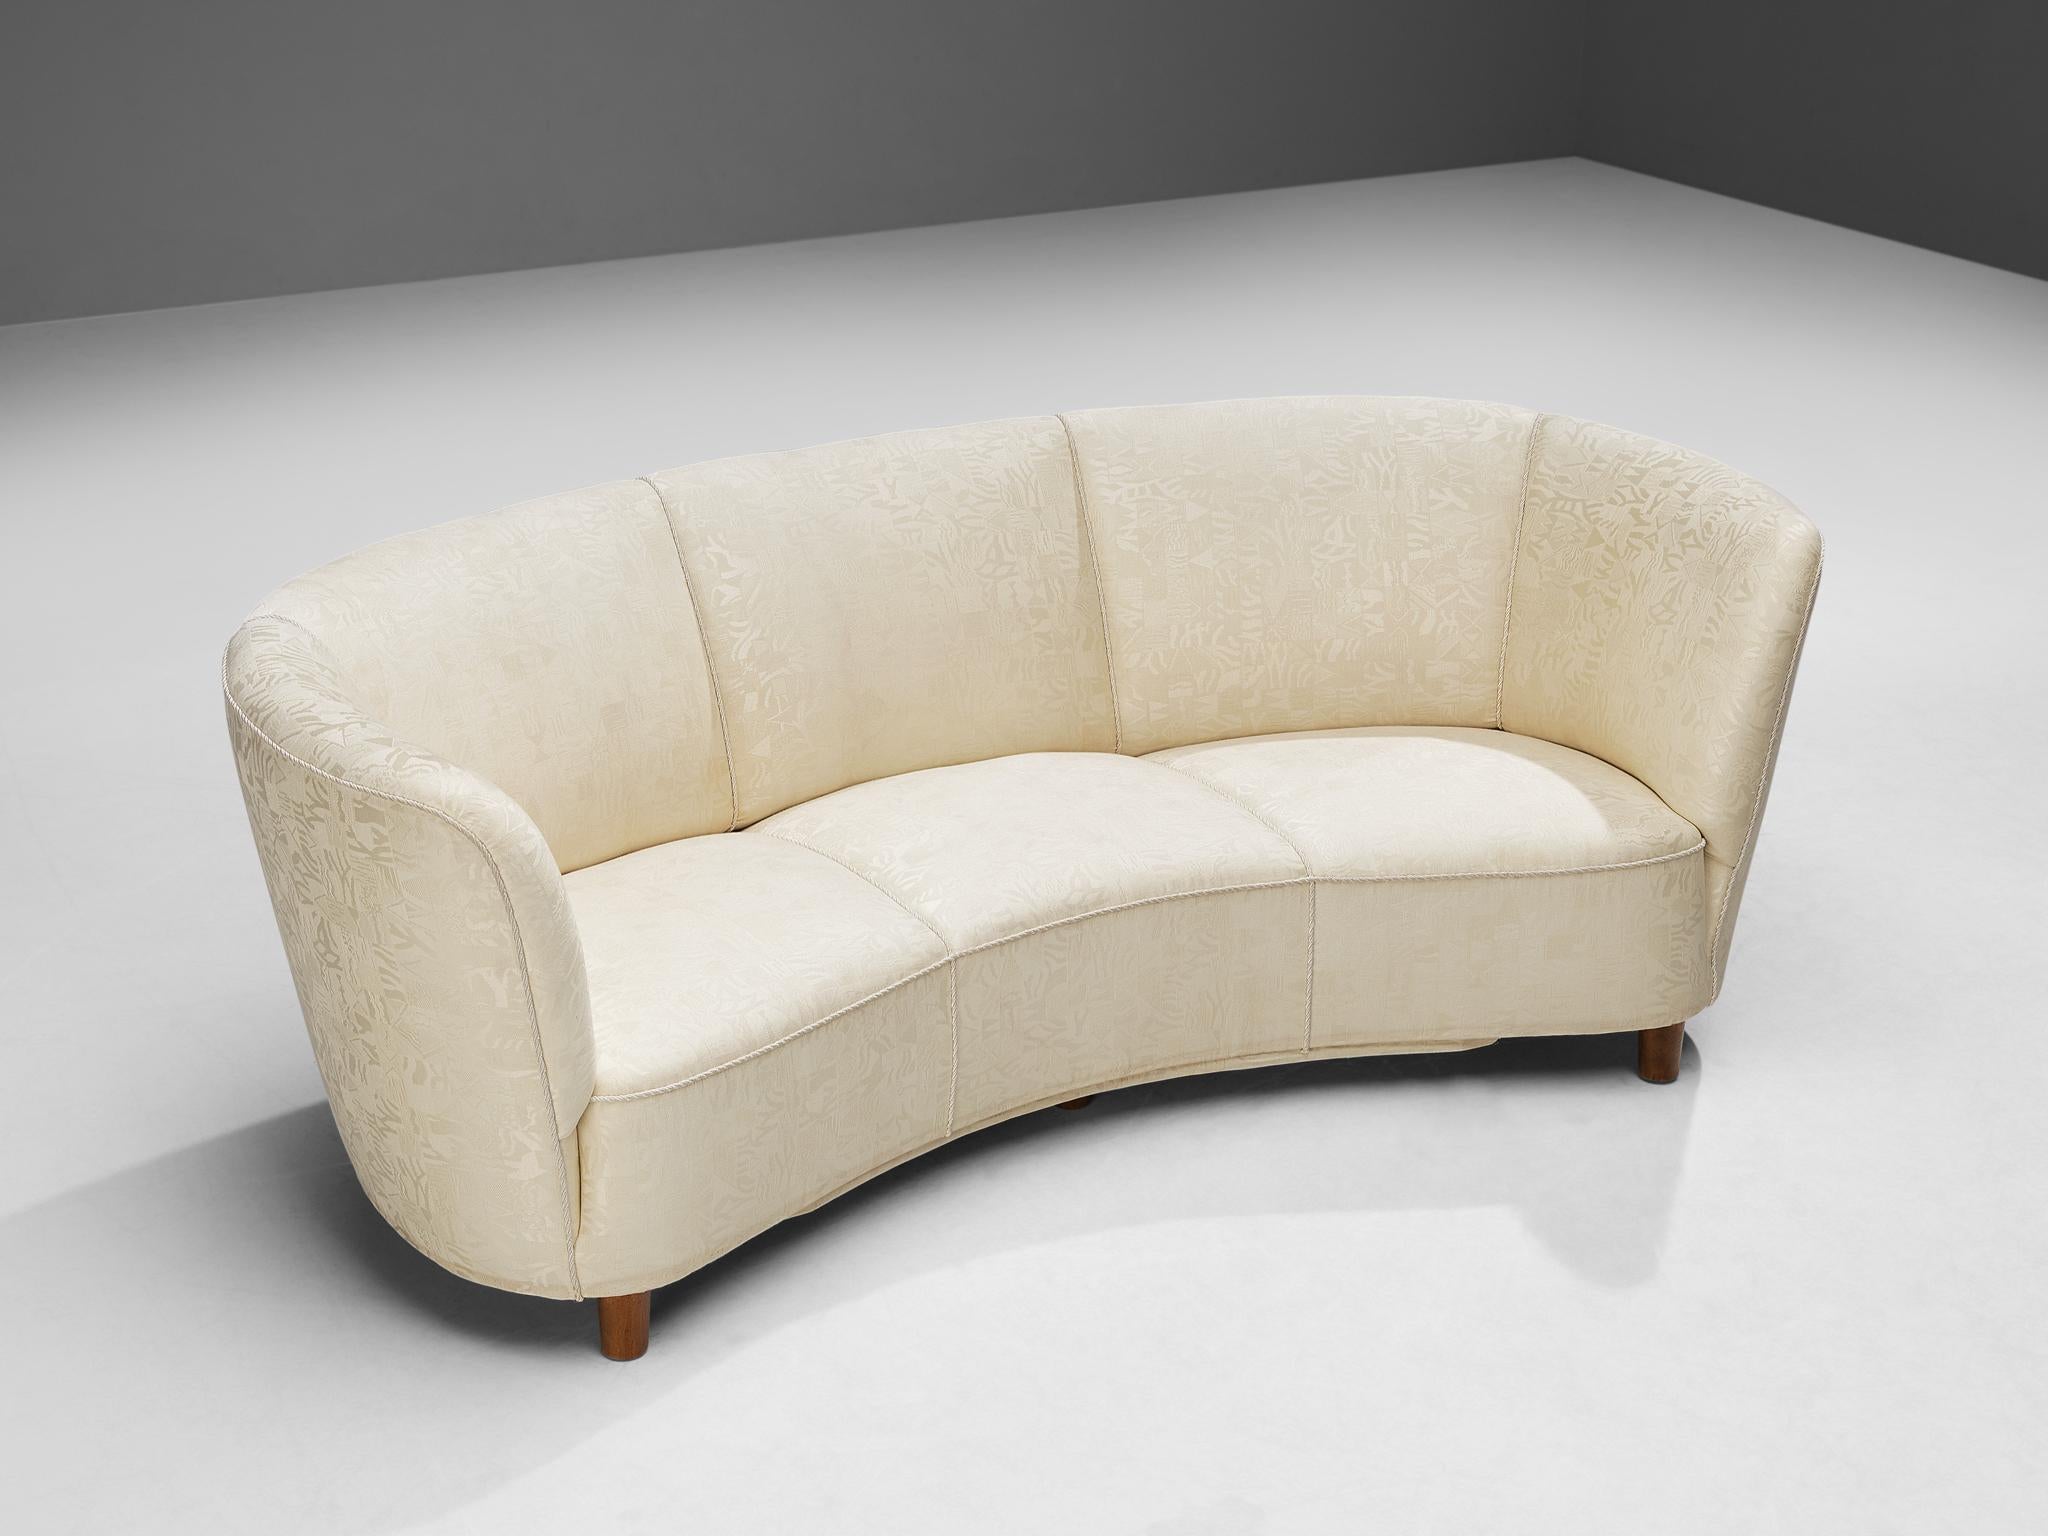 Danish Banana Sofa in Patterned Off White Upholstery  In Good Condition For Sale In Waalwijk, NL